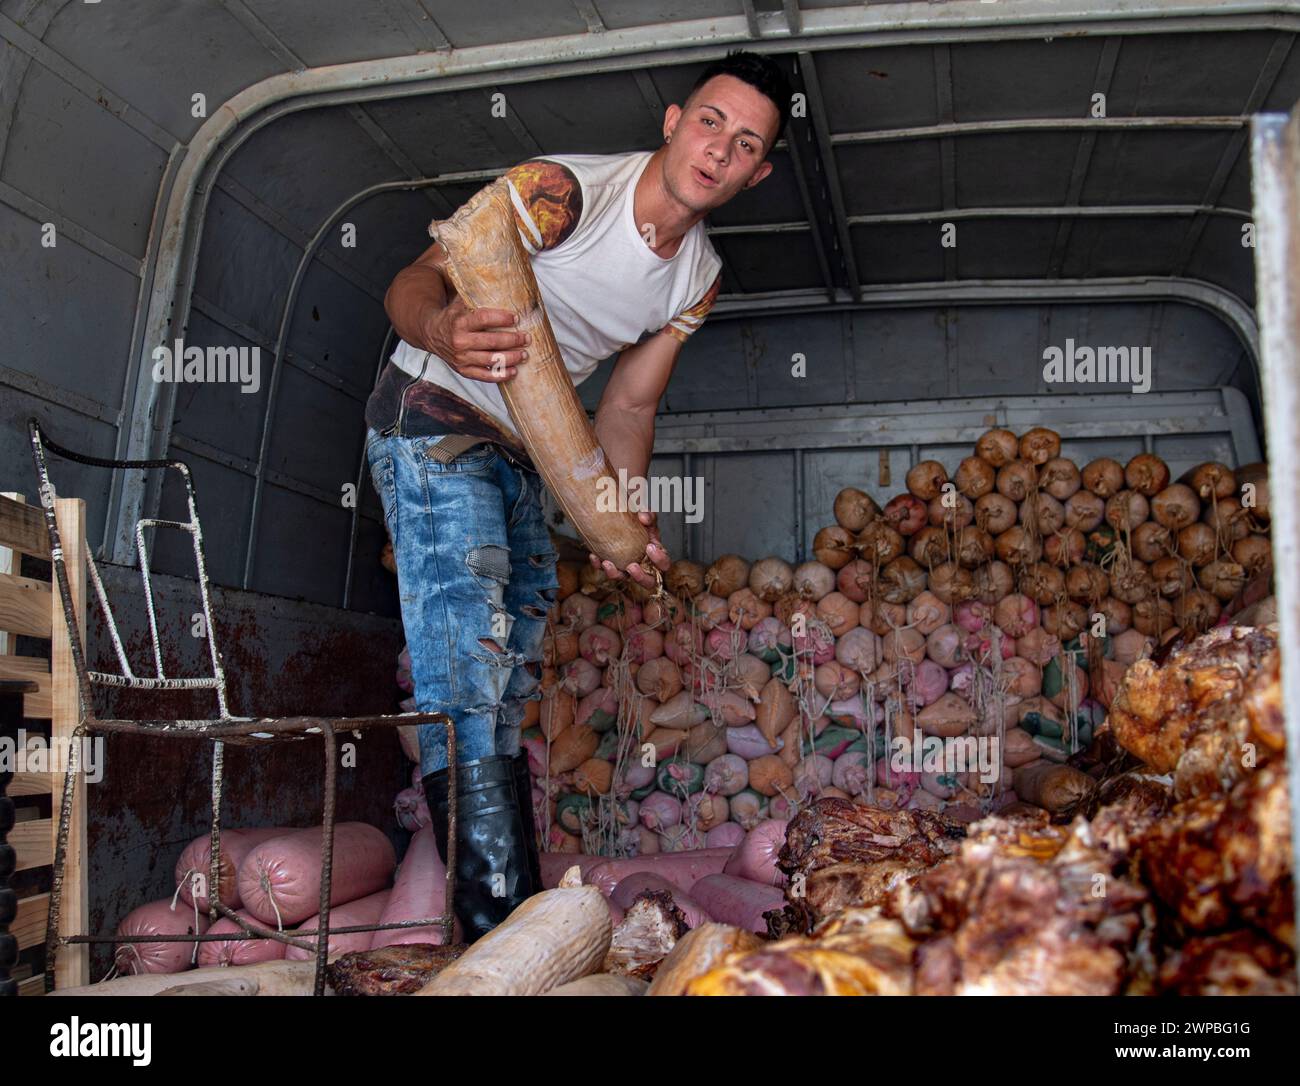 Young man sweating and perspiring on a hot day, works tossing and delivering food at a cafe in Havana, Cuba Stock Photo